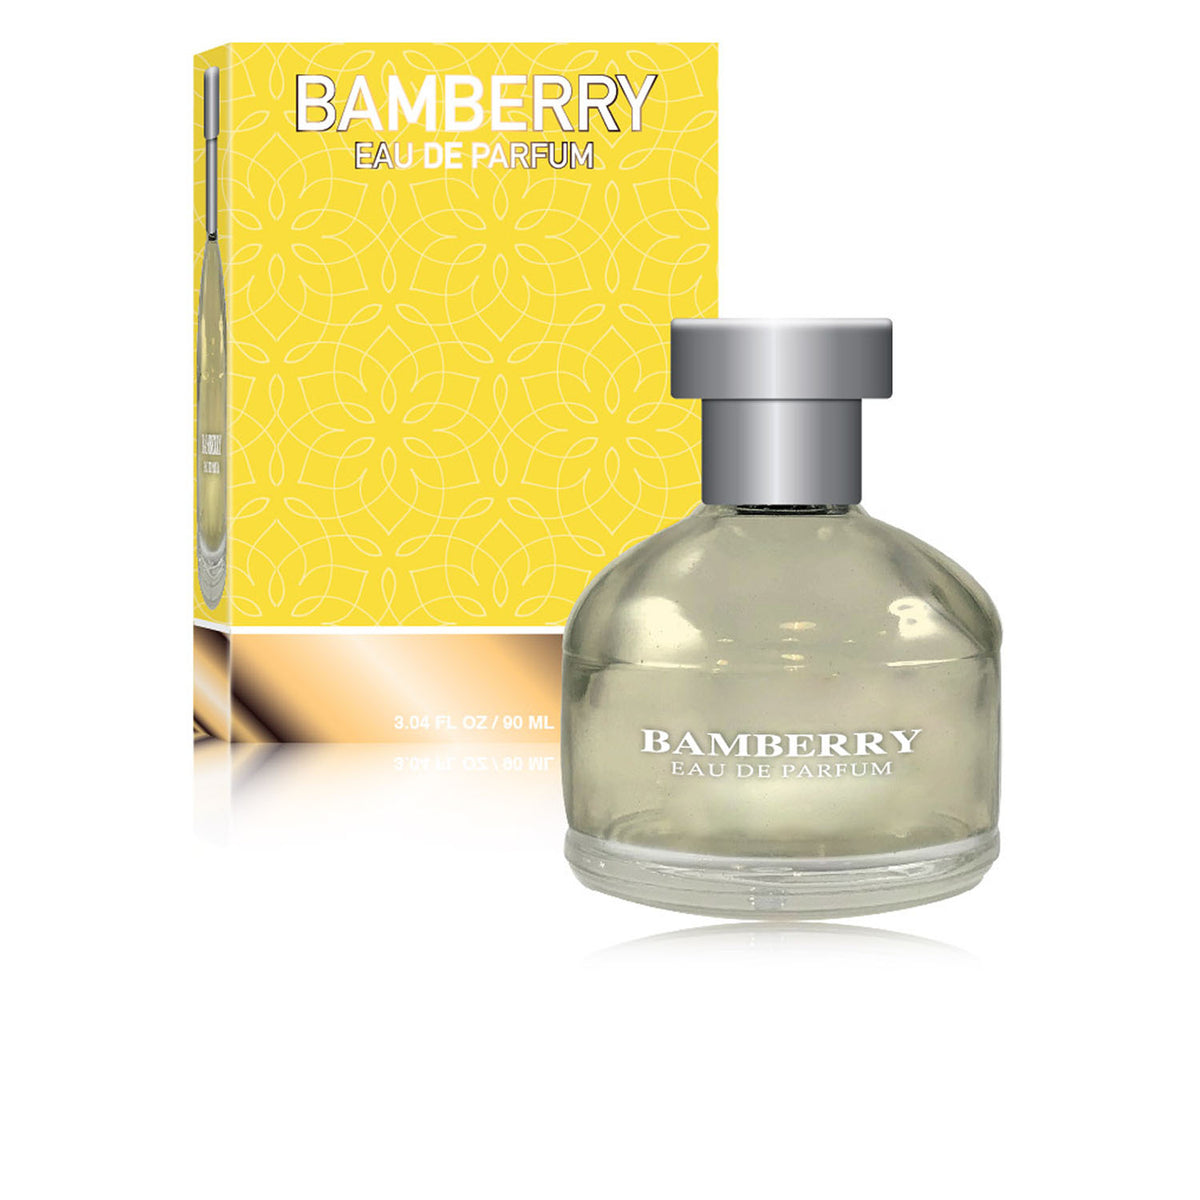 Bamberry Our version of Weekend® Burberry* – belcamshop